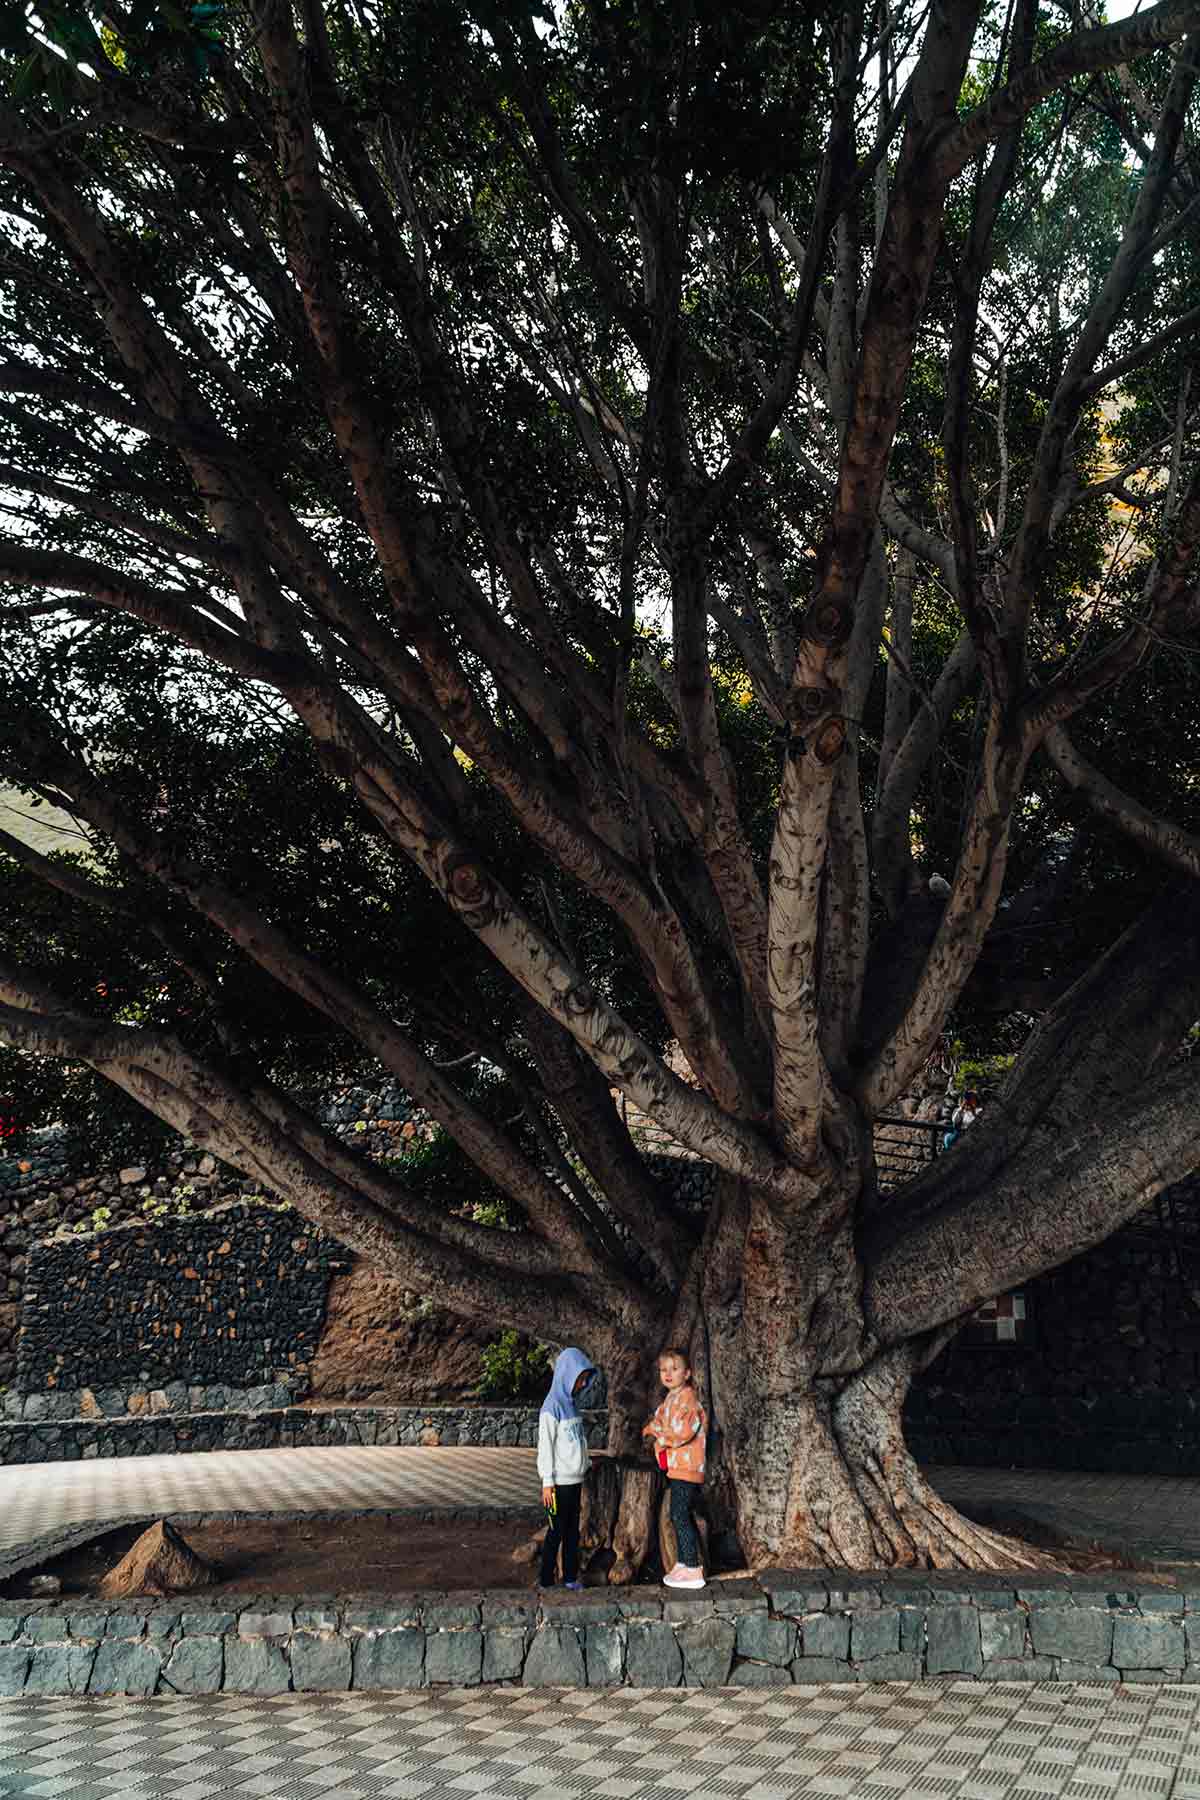 The laurel tree in the main square of Masca